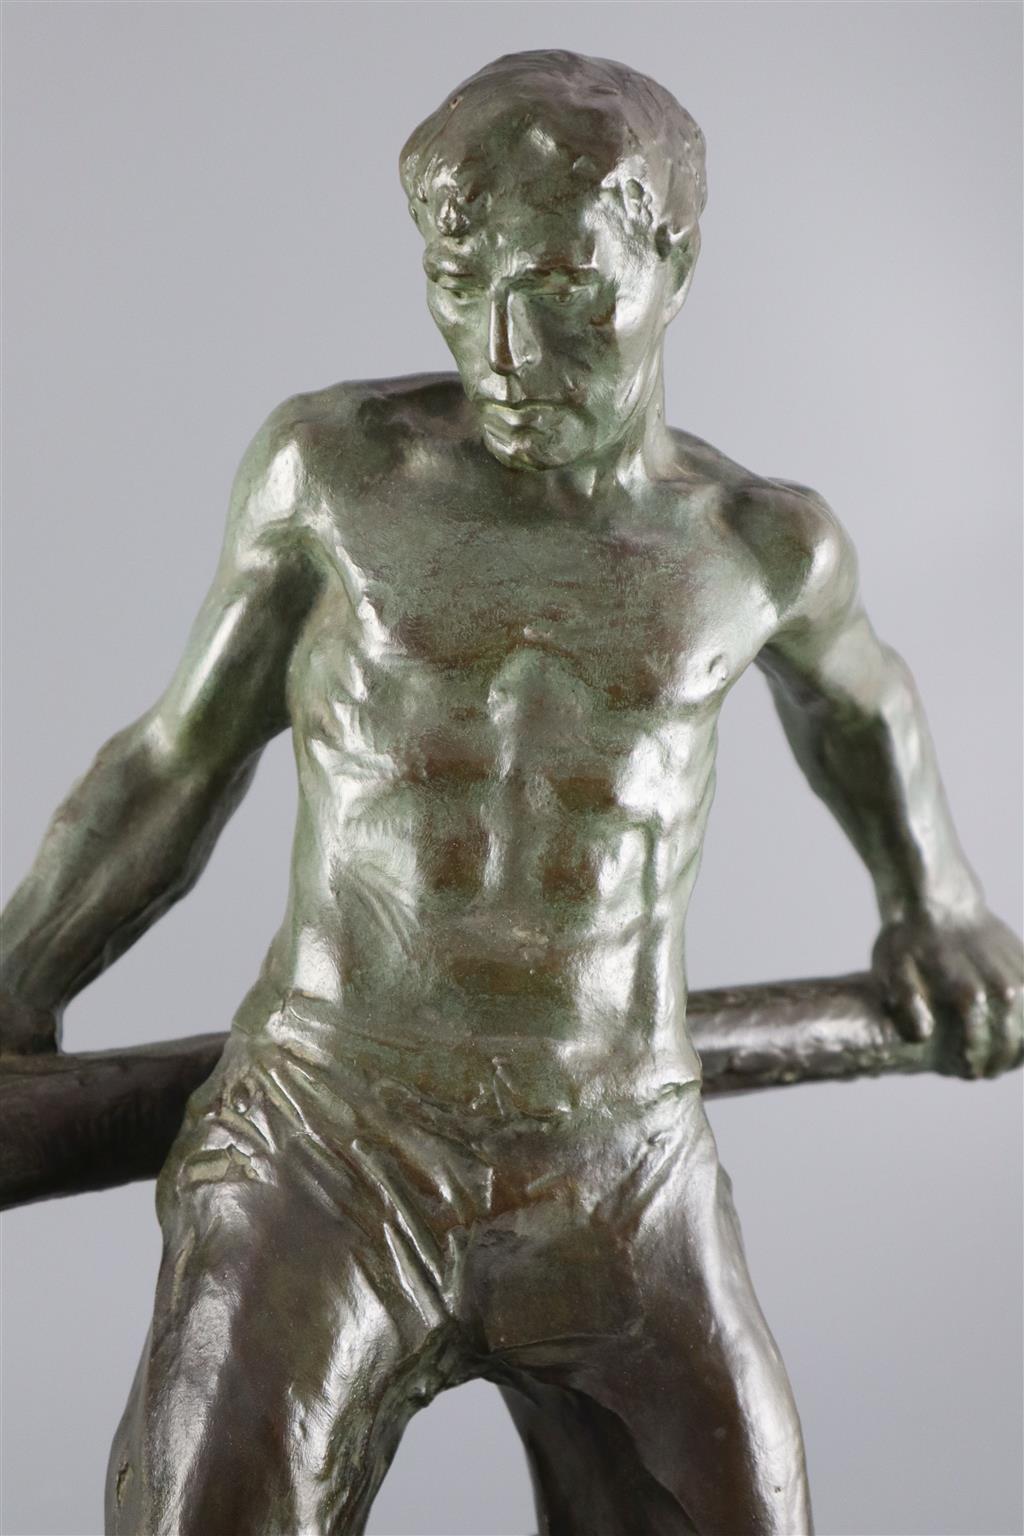 Victor Demanet (1895-1964). A bronze figure of a barge man operating a lock gate, width 26in. height 17in.